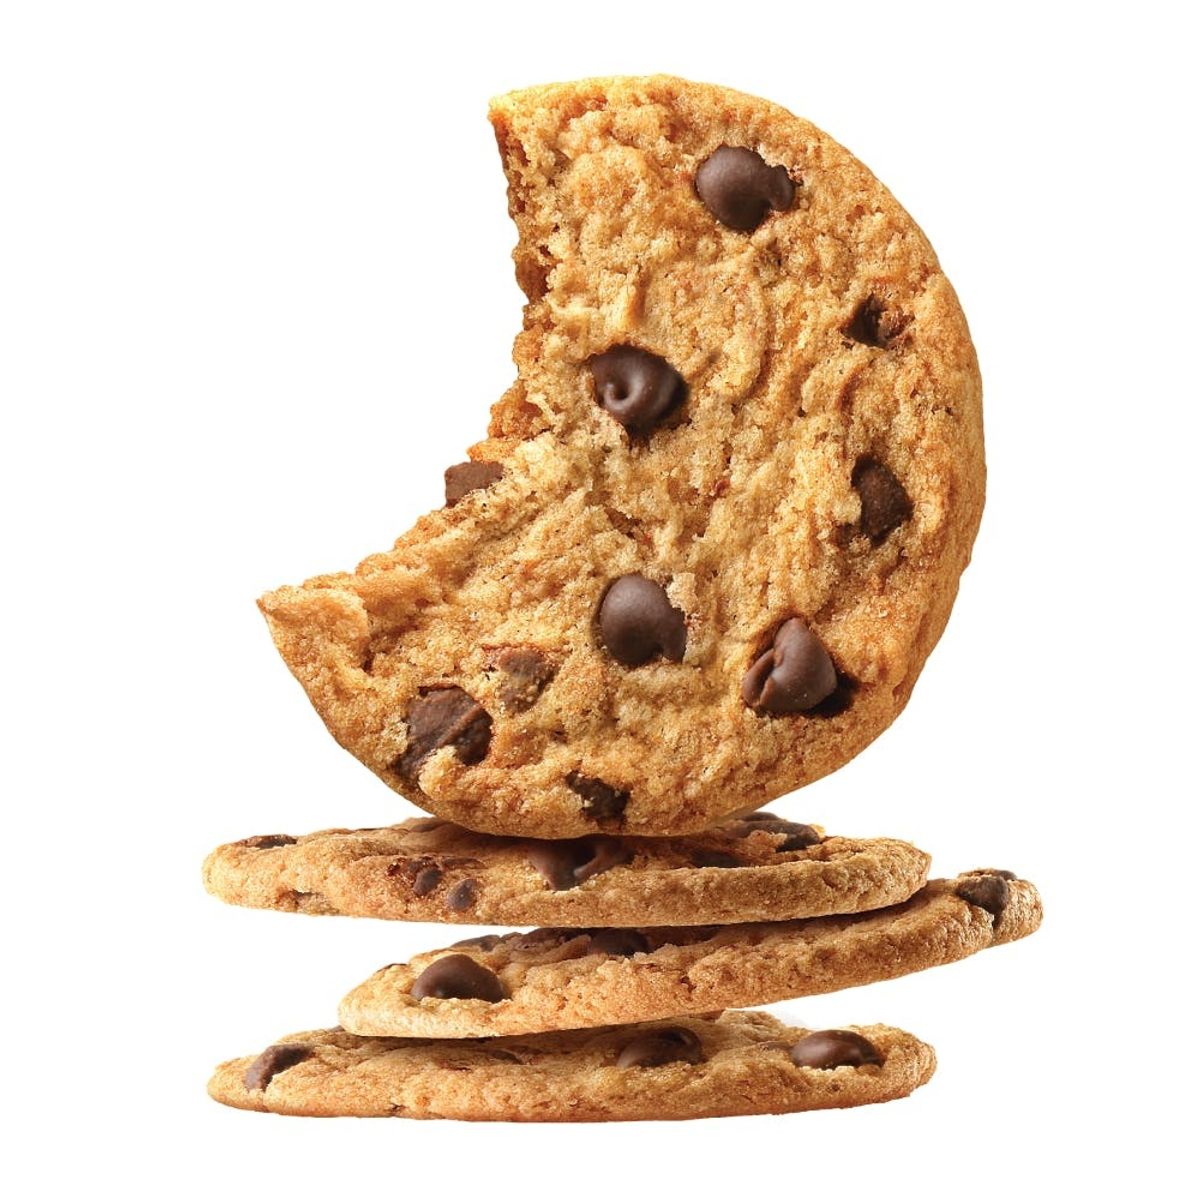 Chips Ahoy! THINS Are the Crispier Version of the Cookies You Love